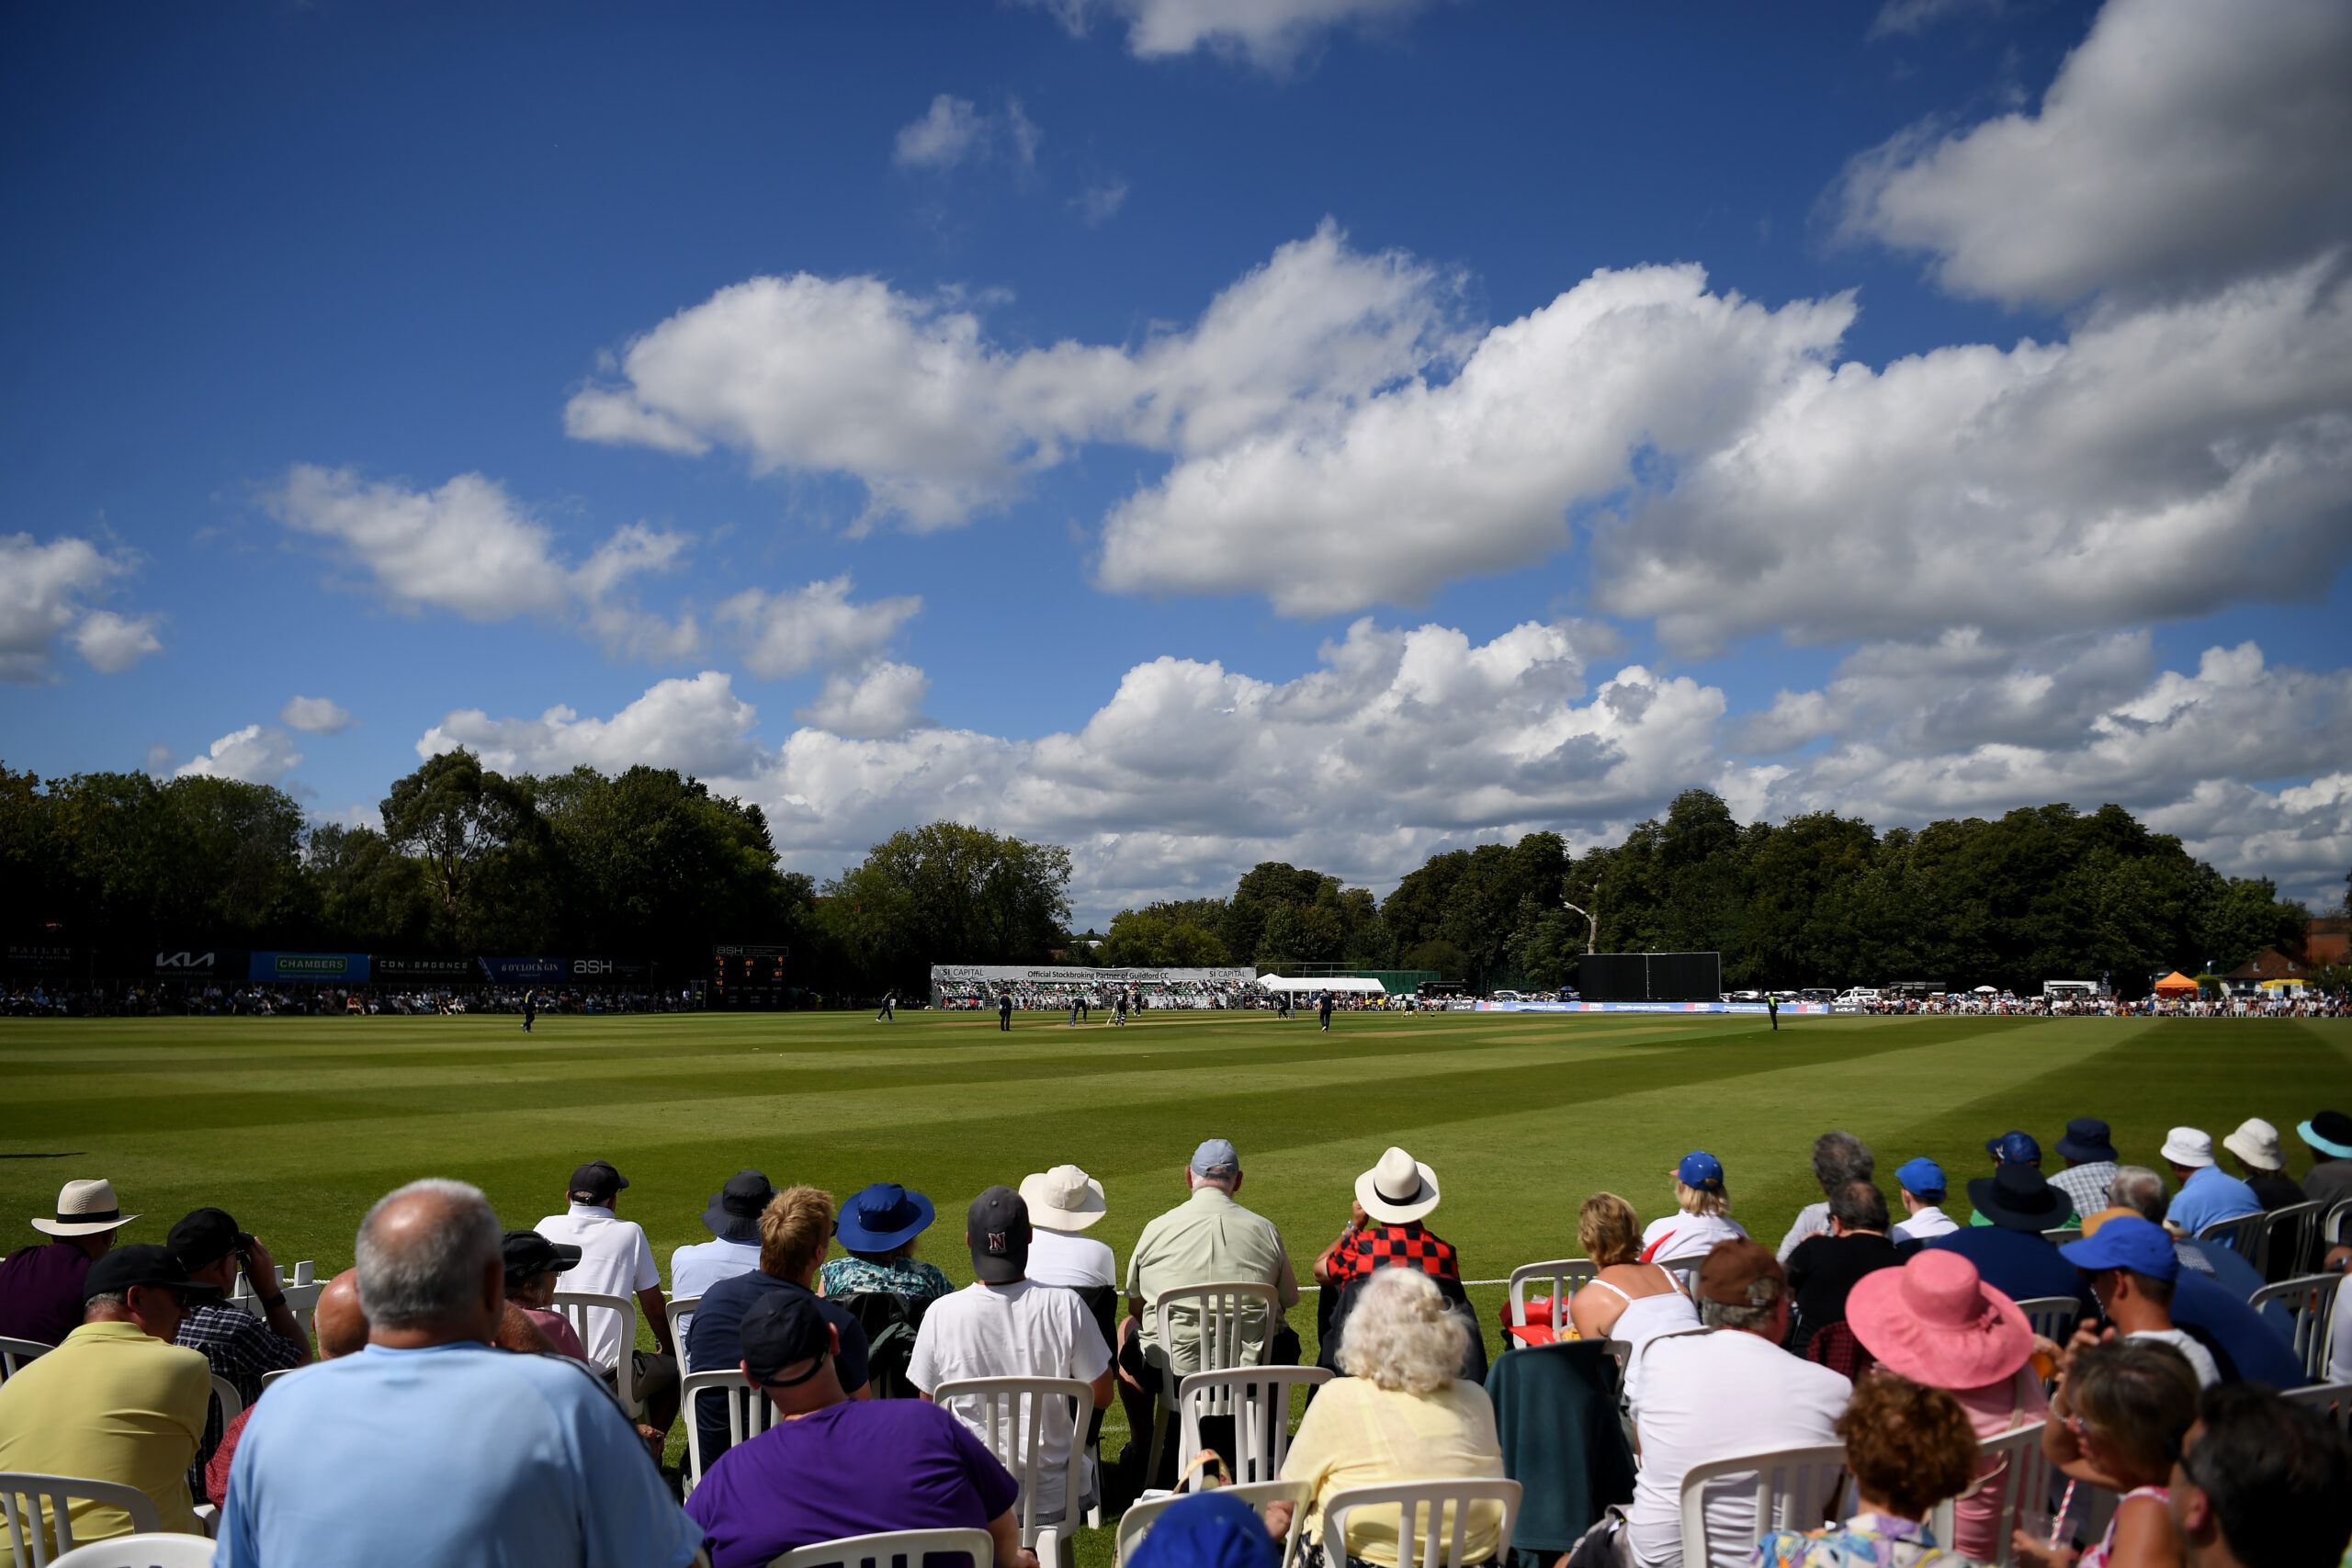 Surrey Second XI face Sussex at Guildford